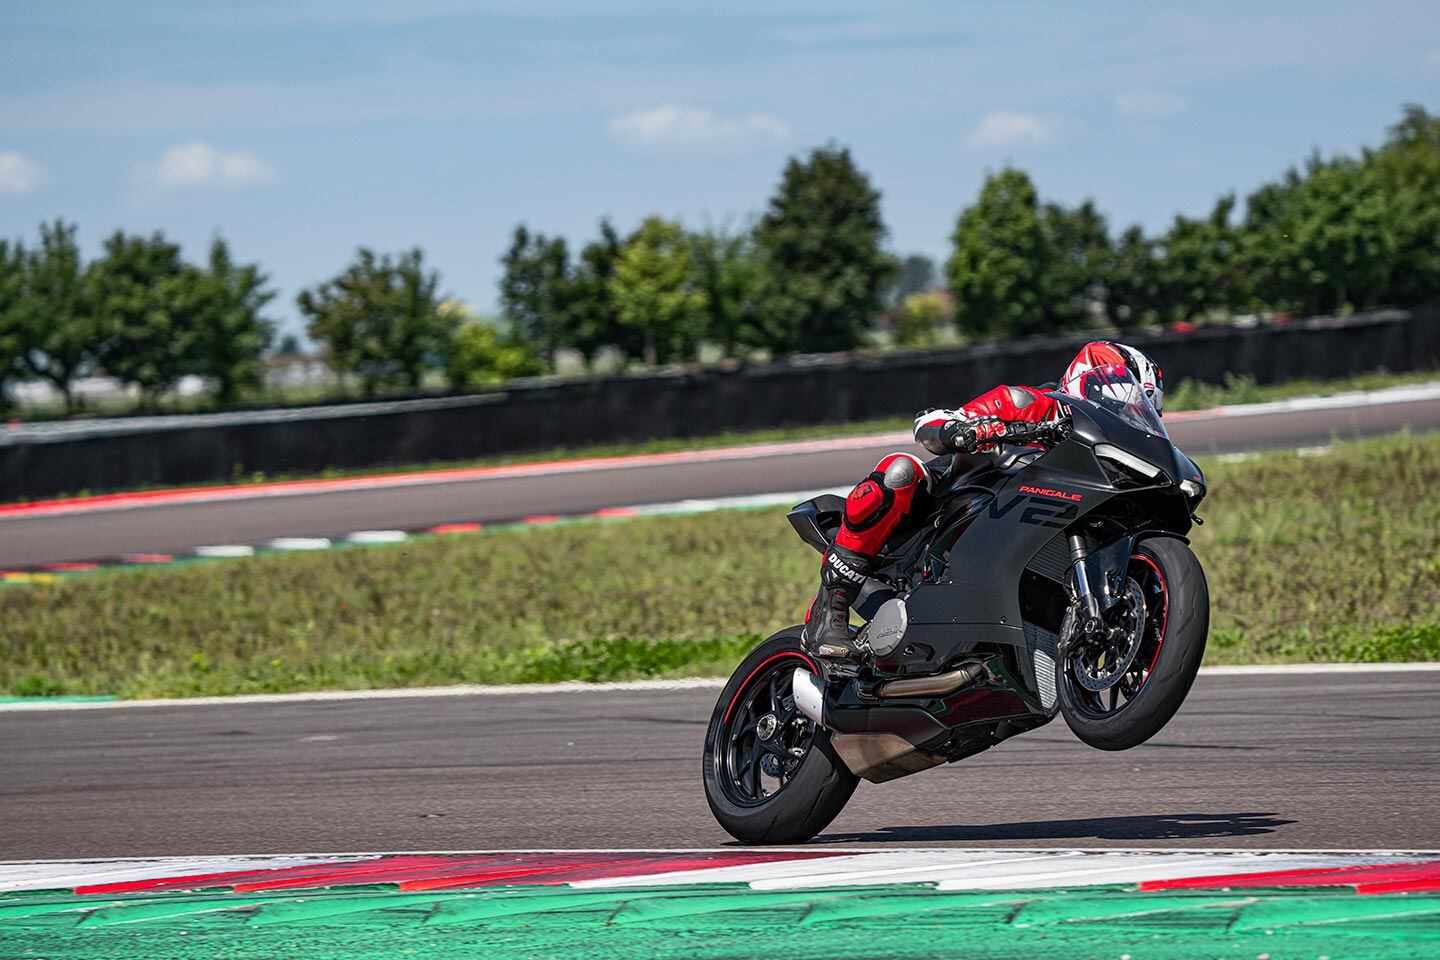 The middleweight sportbike category is a mix of carryover models that manufacturers aren’t ready to let go of just yet, and fully modern options like the Ducati Panigale V2.